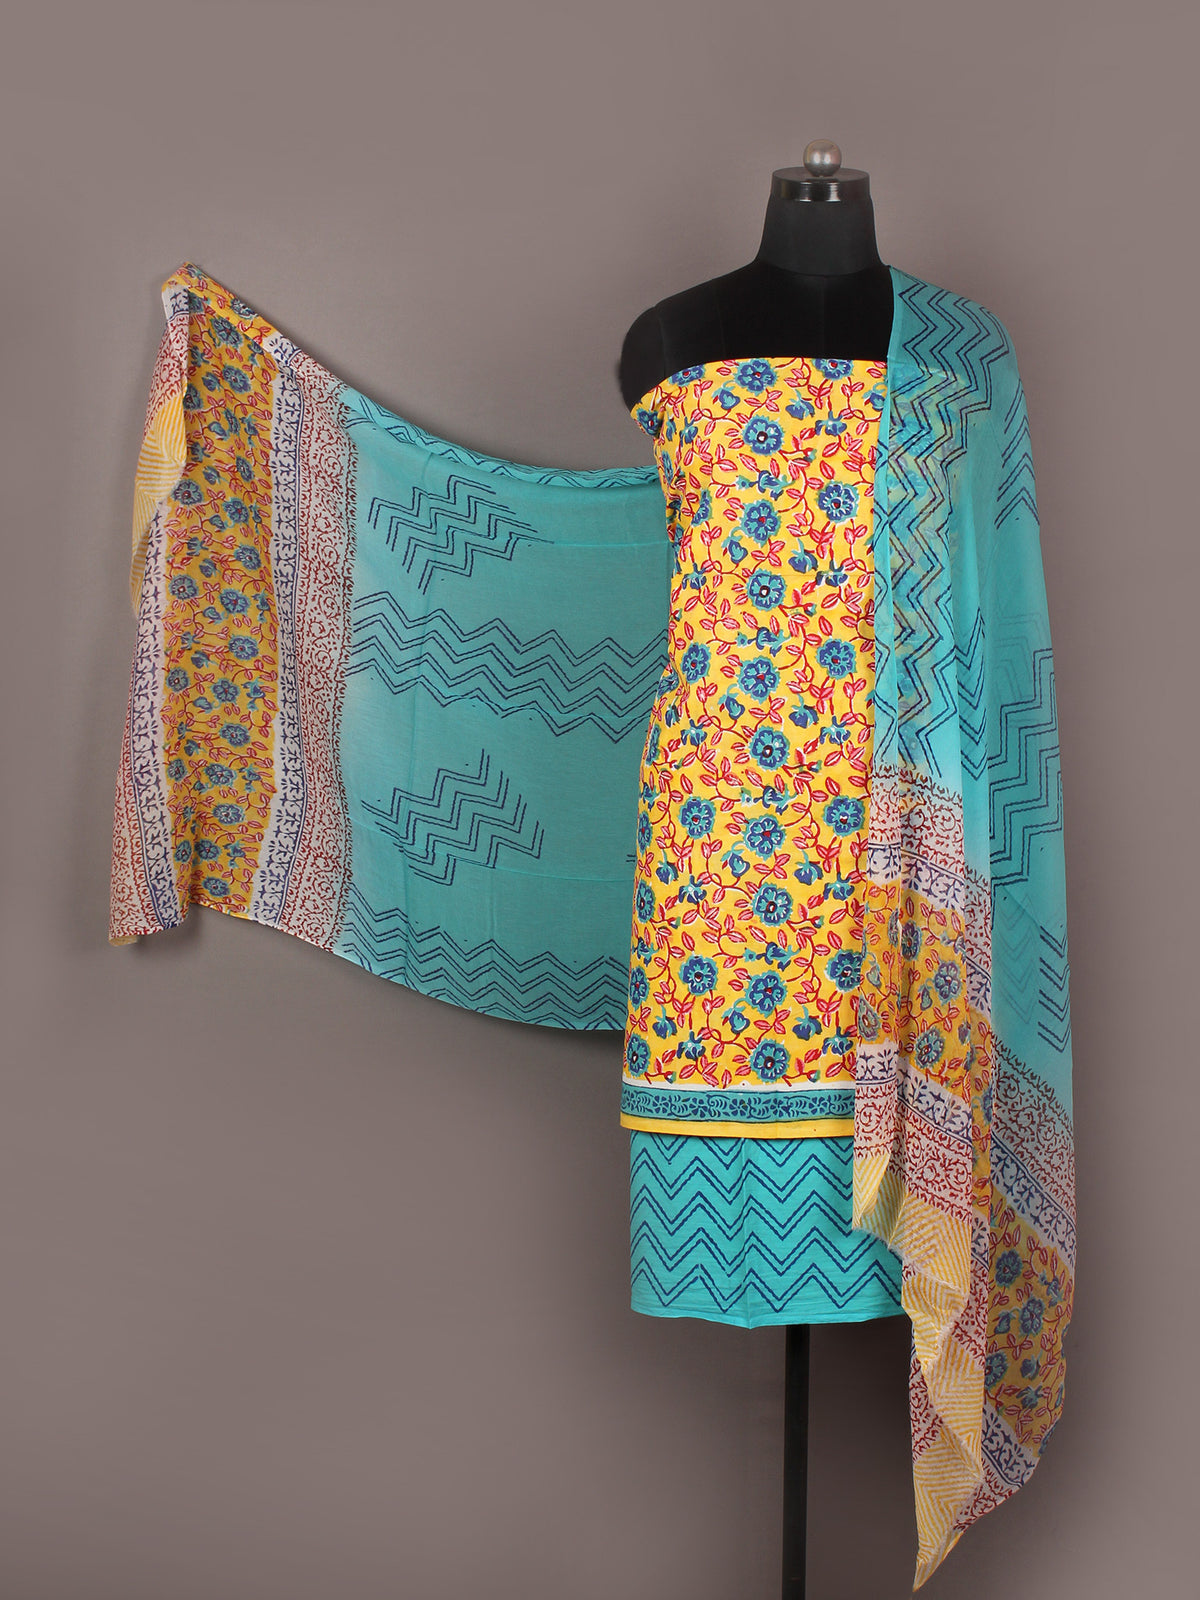 Yellow Teal Blue Red Hand Block Printed Cotton Suit-Salwar Fabric With Chiffon Dupatta - S1628158